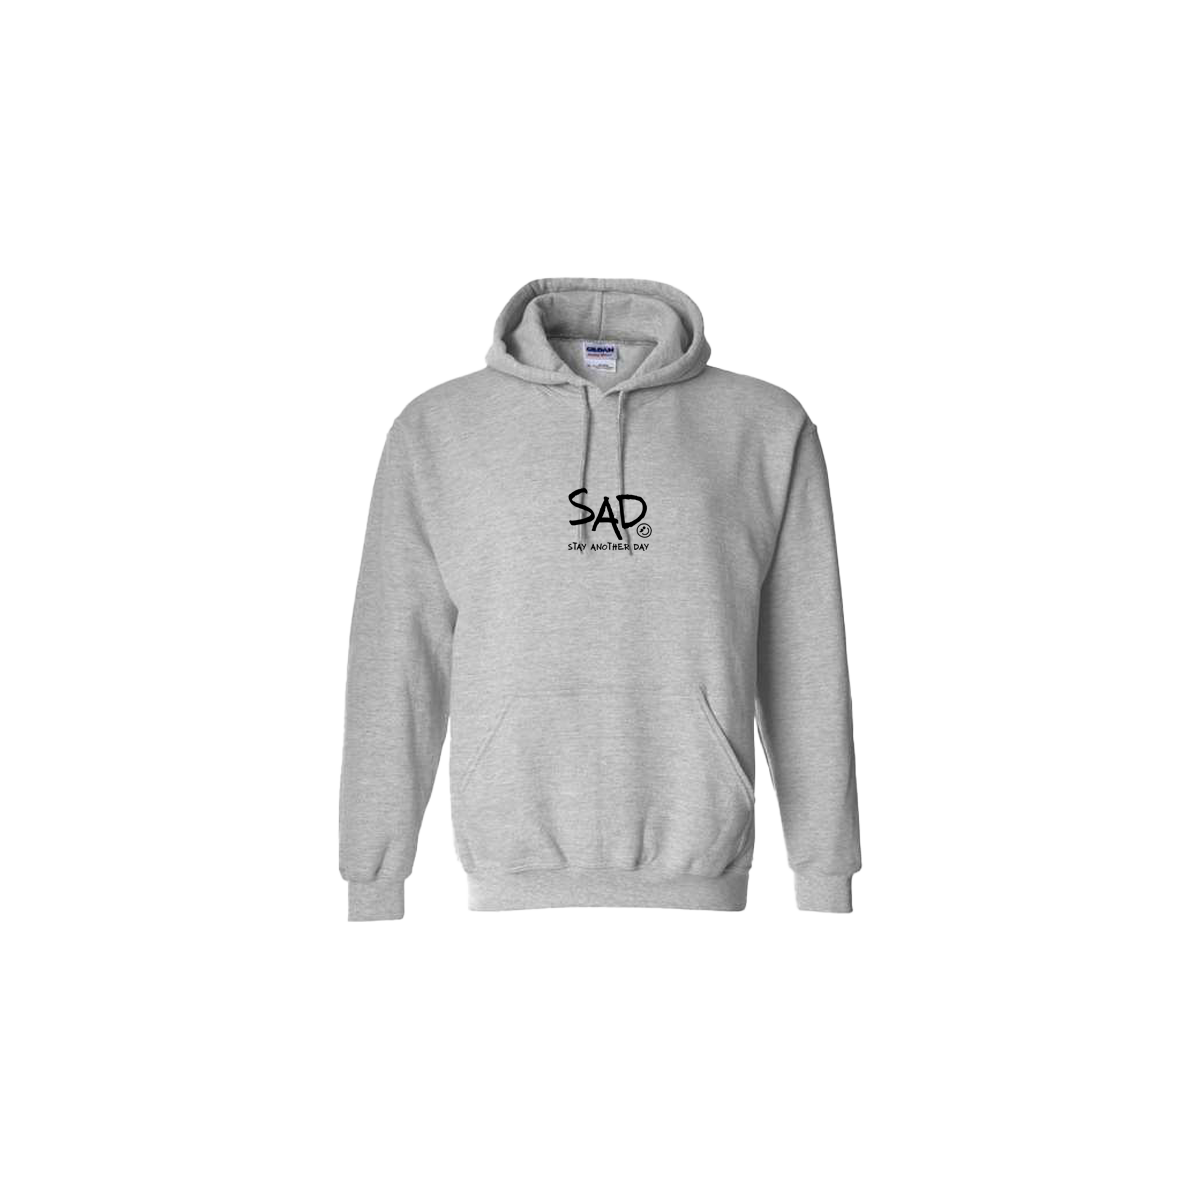 Stay Another Day - SAD Logo Embroidered Grey Hoodie - Mental Health Awareness Clothing